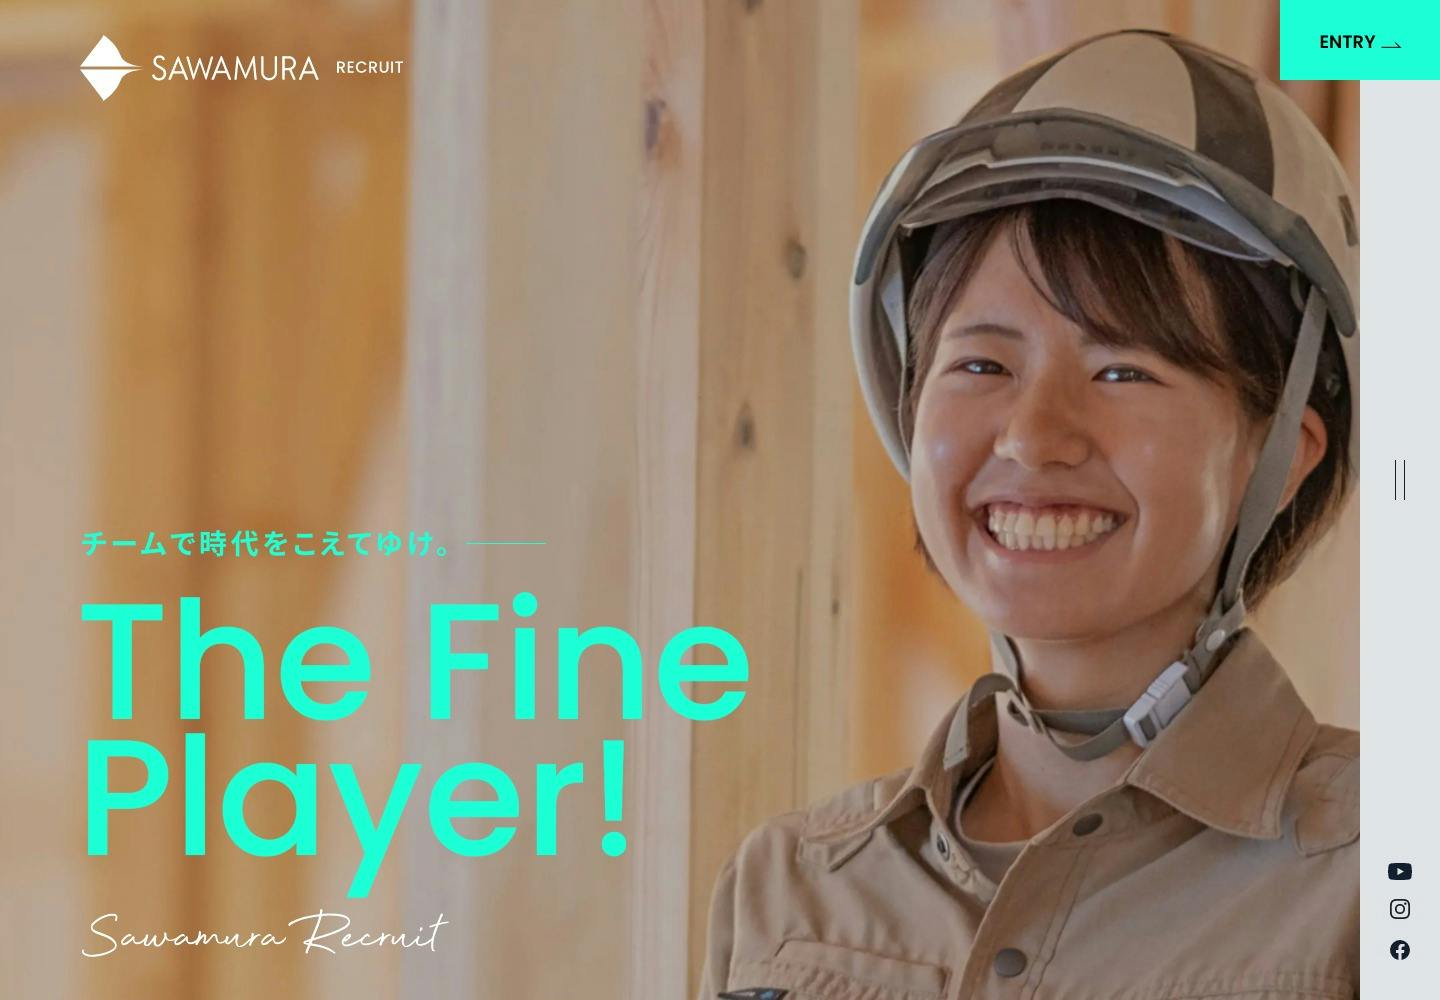 Cover Image for SAWAMURA RECRUIT｜澤村-新卒採用サイト